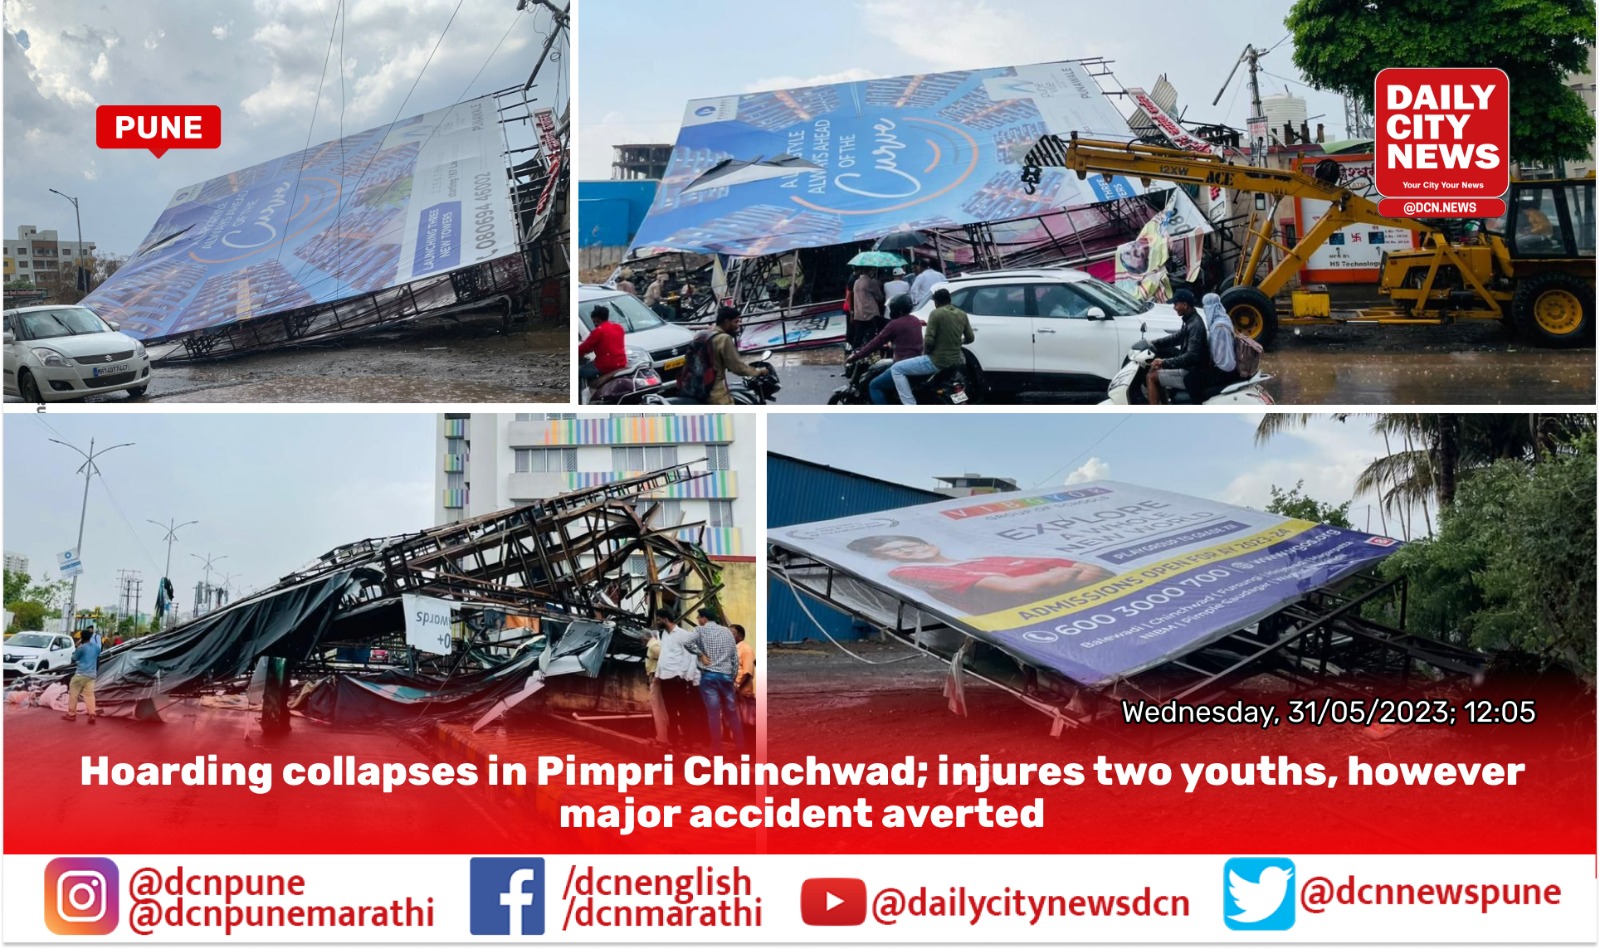 Hoarding collapses in Pimpri Chinchwad; injures two youths, however major accident averted